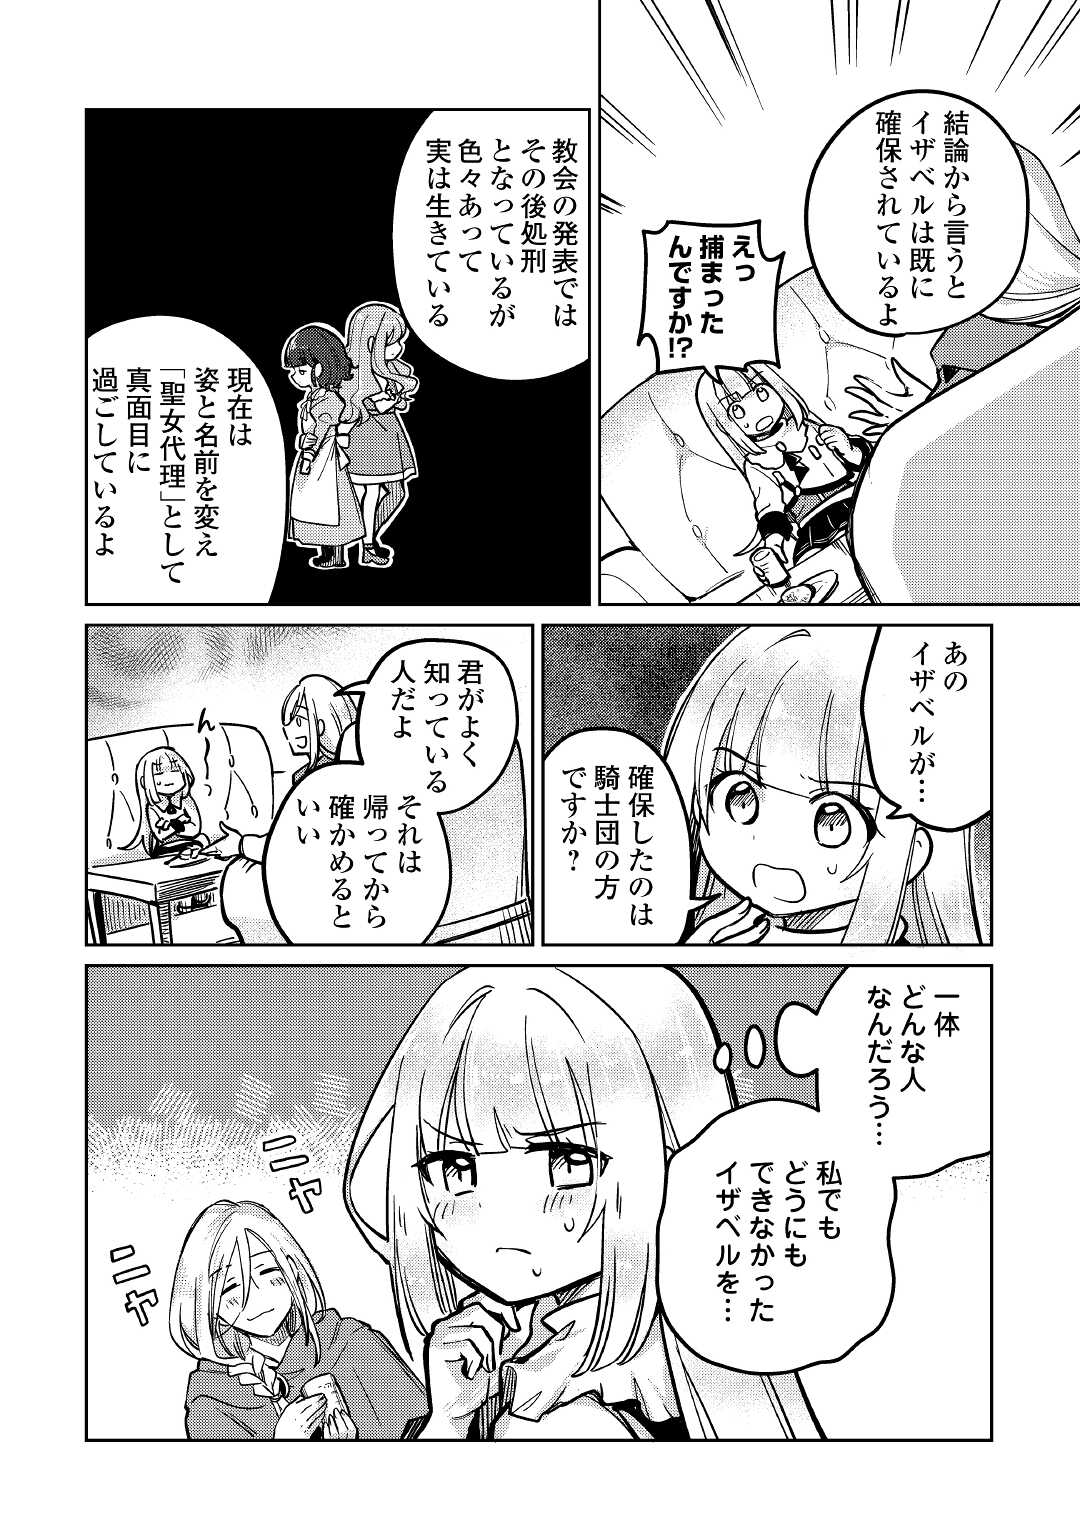 The Former Structural Researcher’s Story of Otherworldly Adventure 第41話 - Page 20